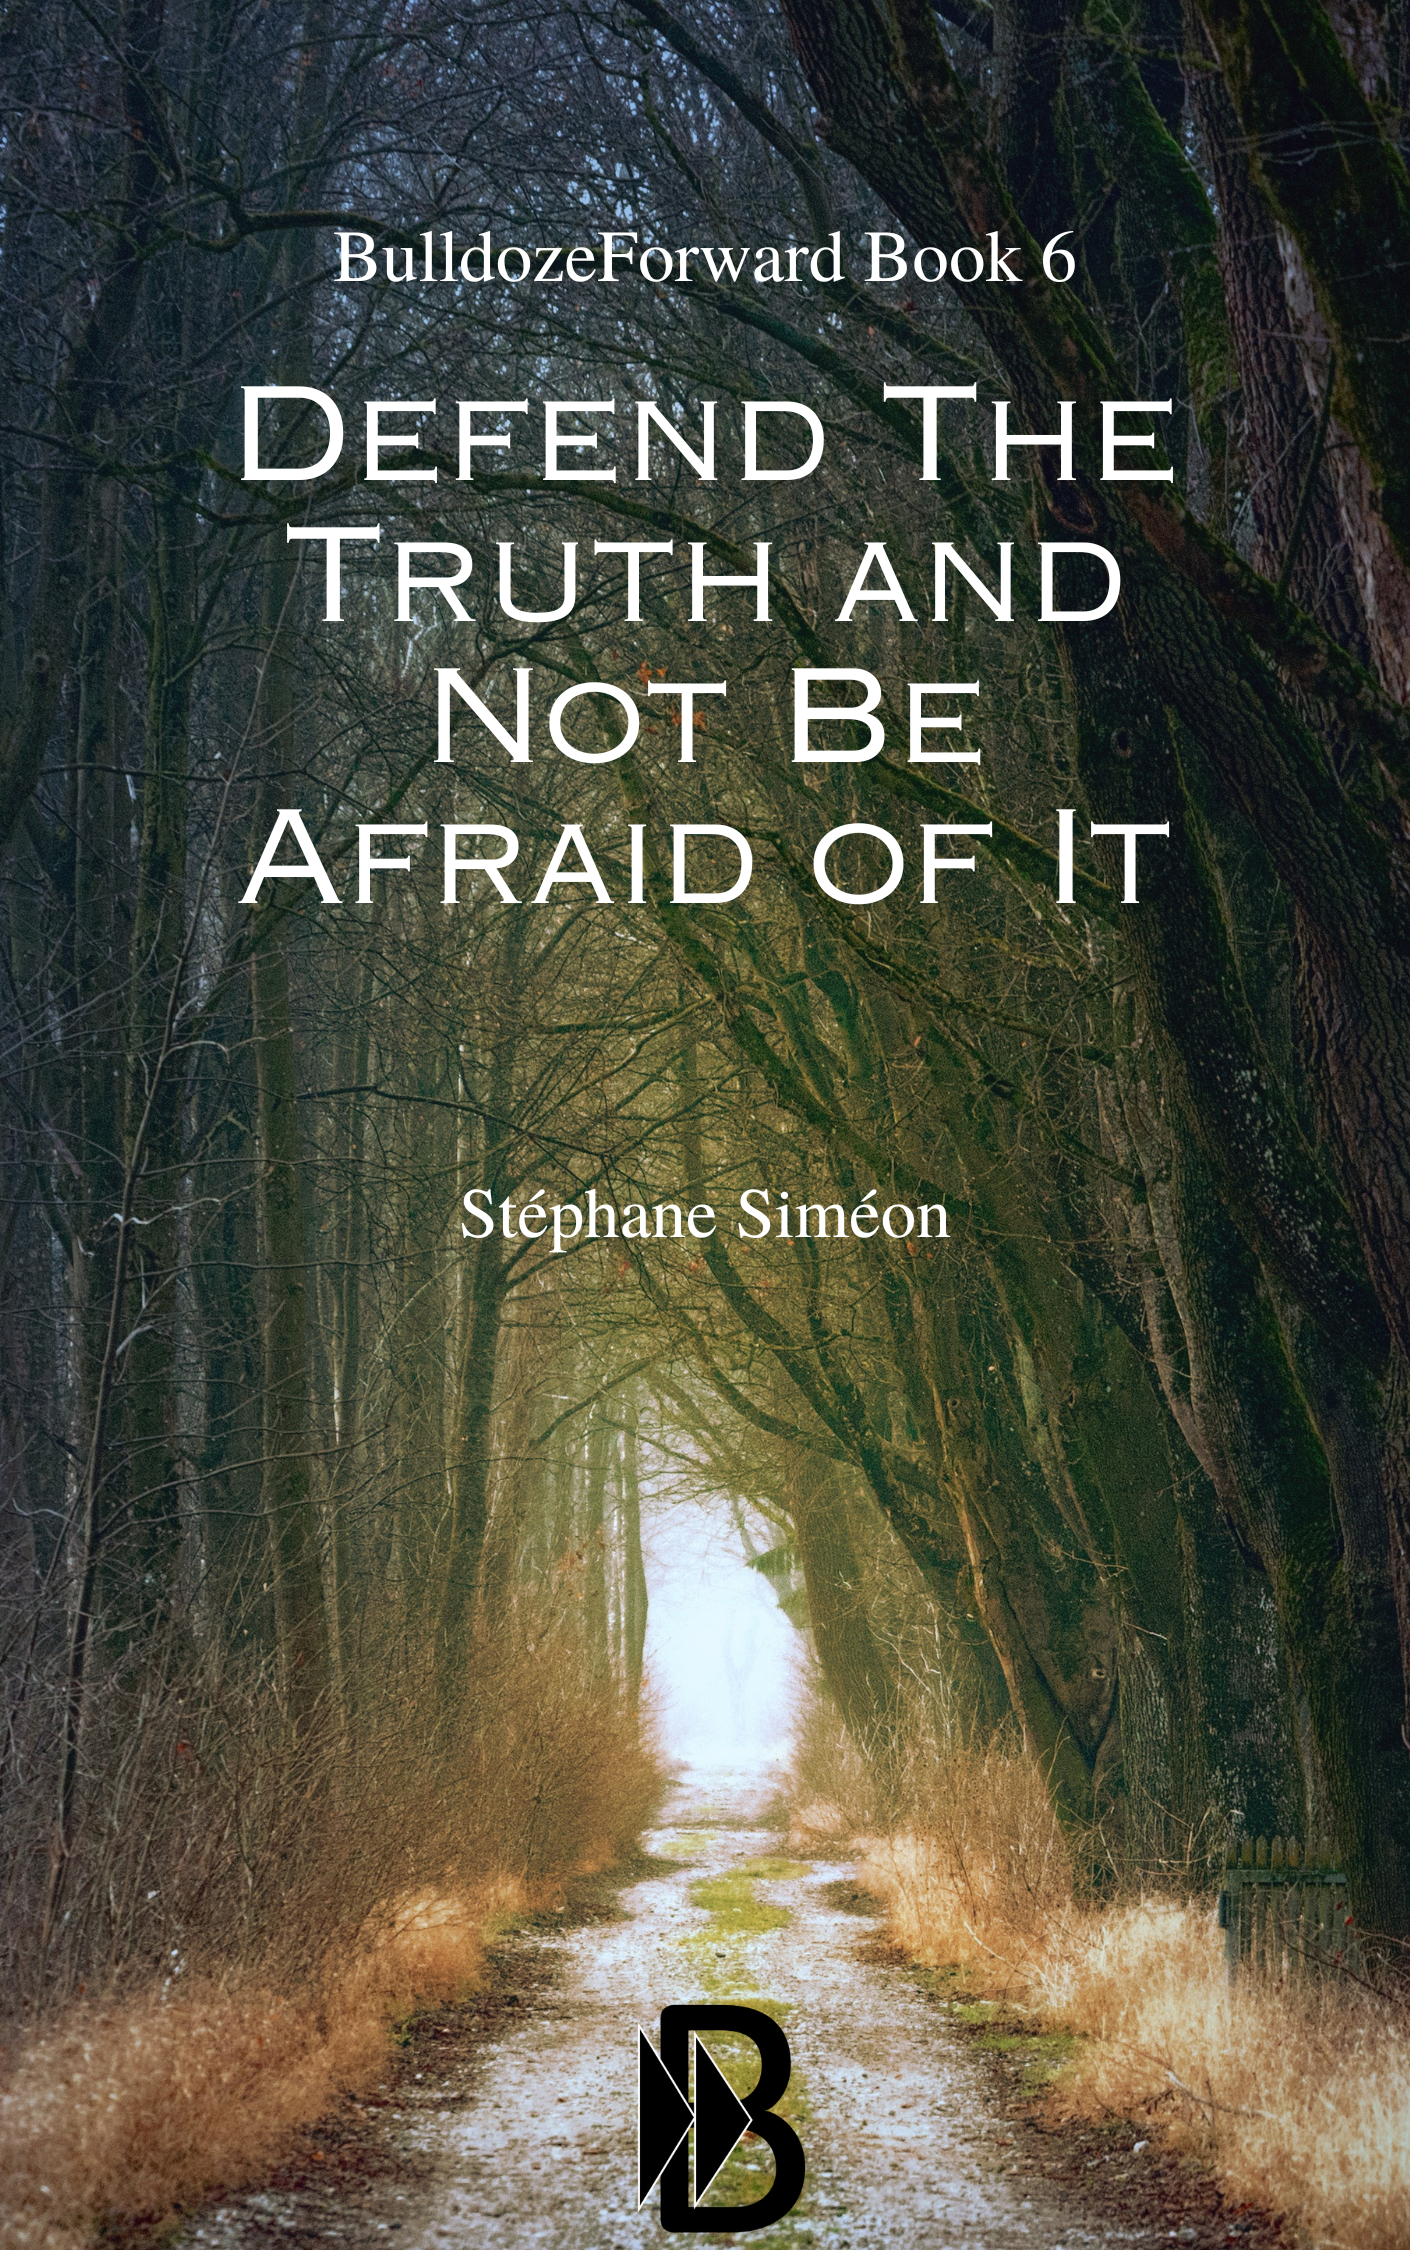 BulldozeForward Book 6 Defend The Truth and Not Be Afraid of It.png